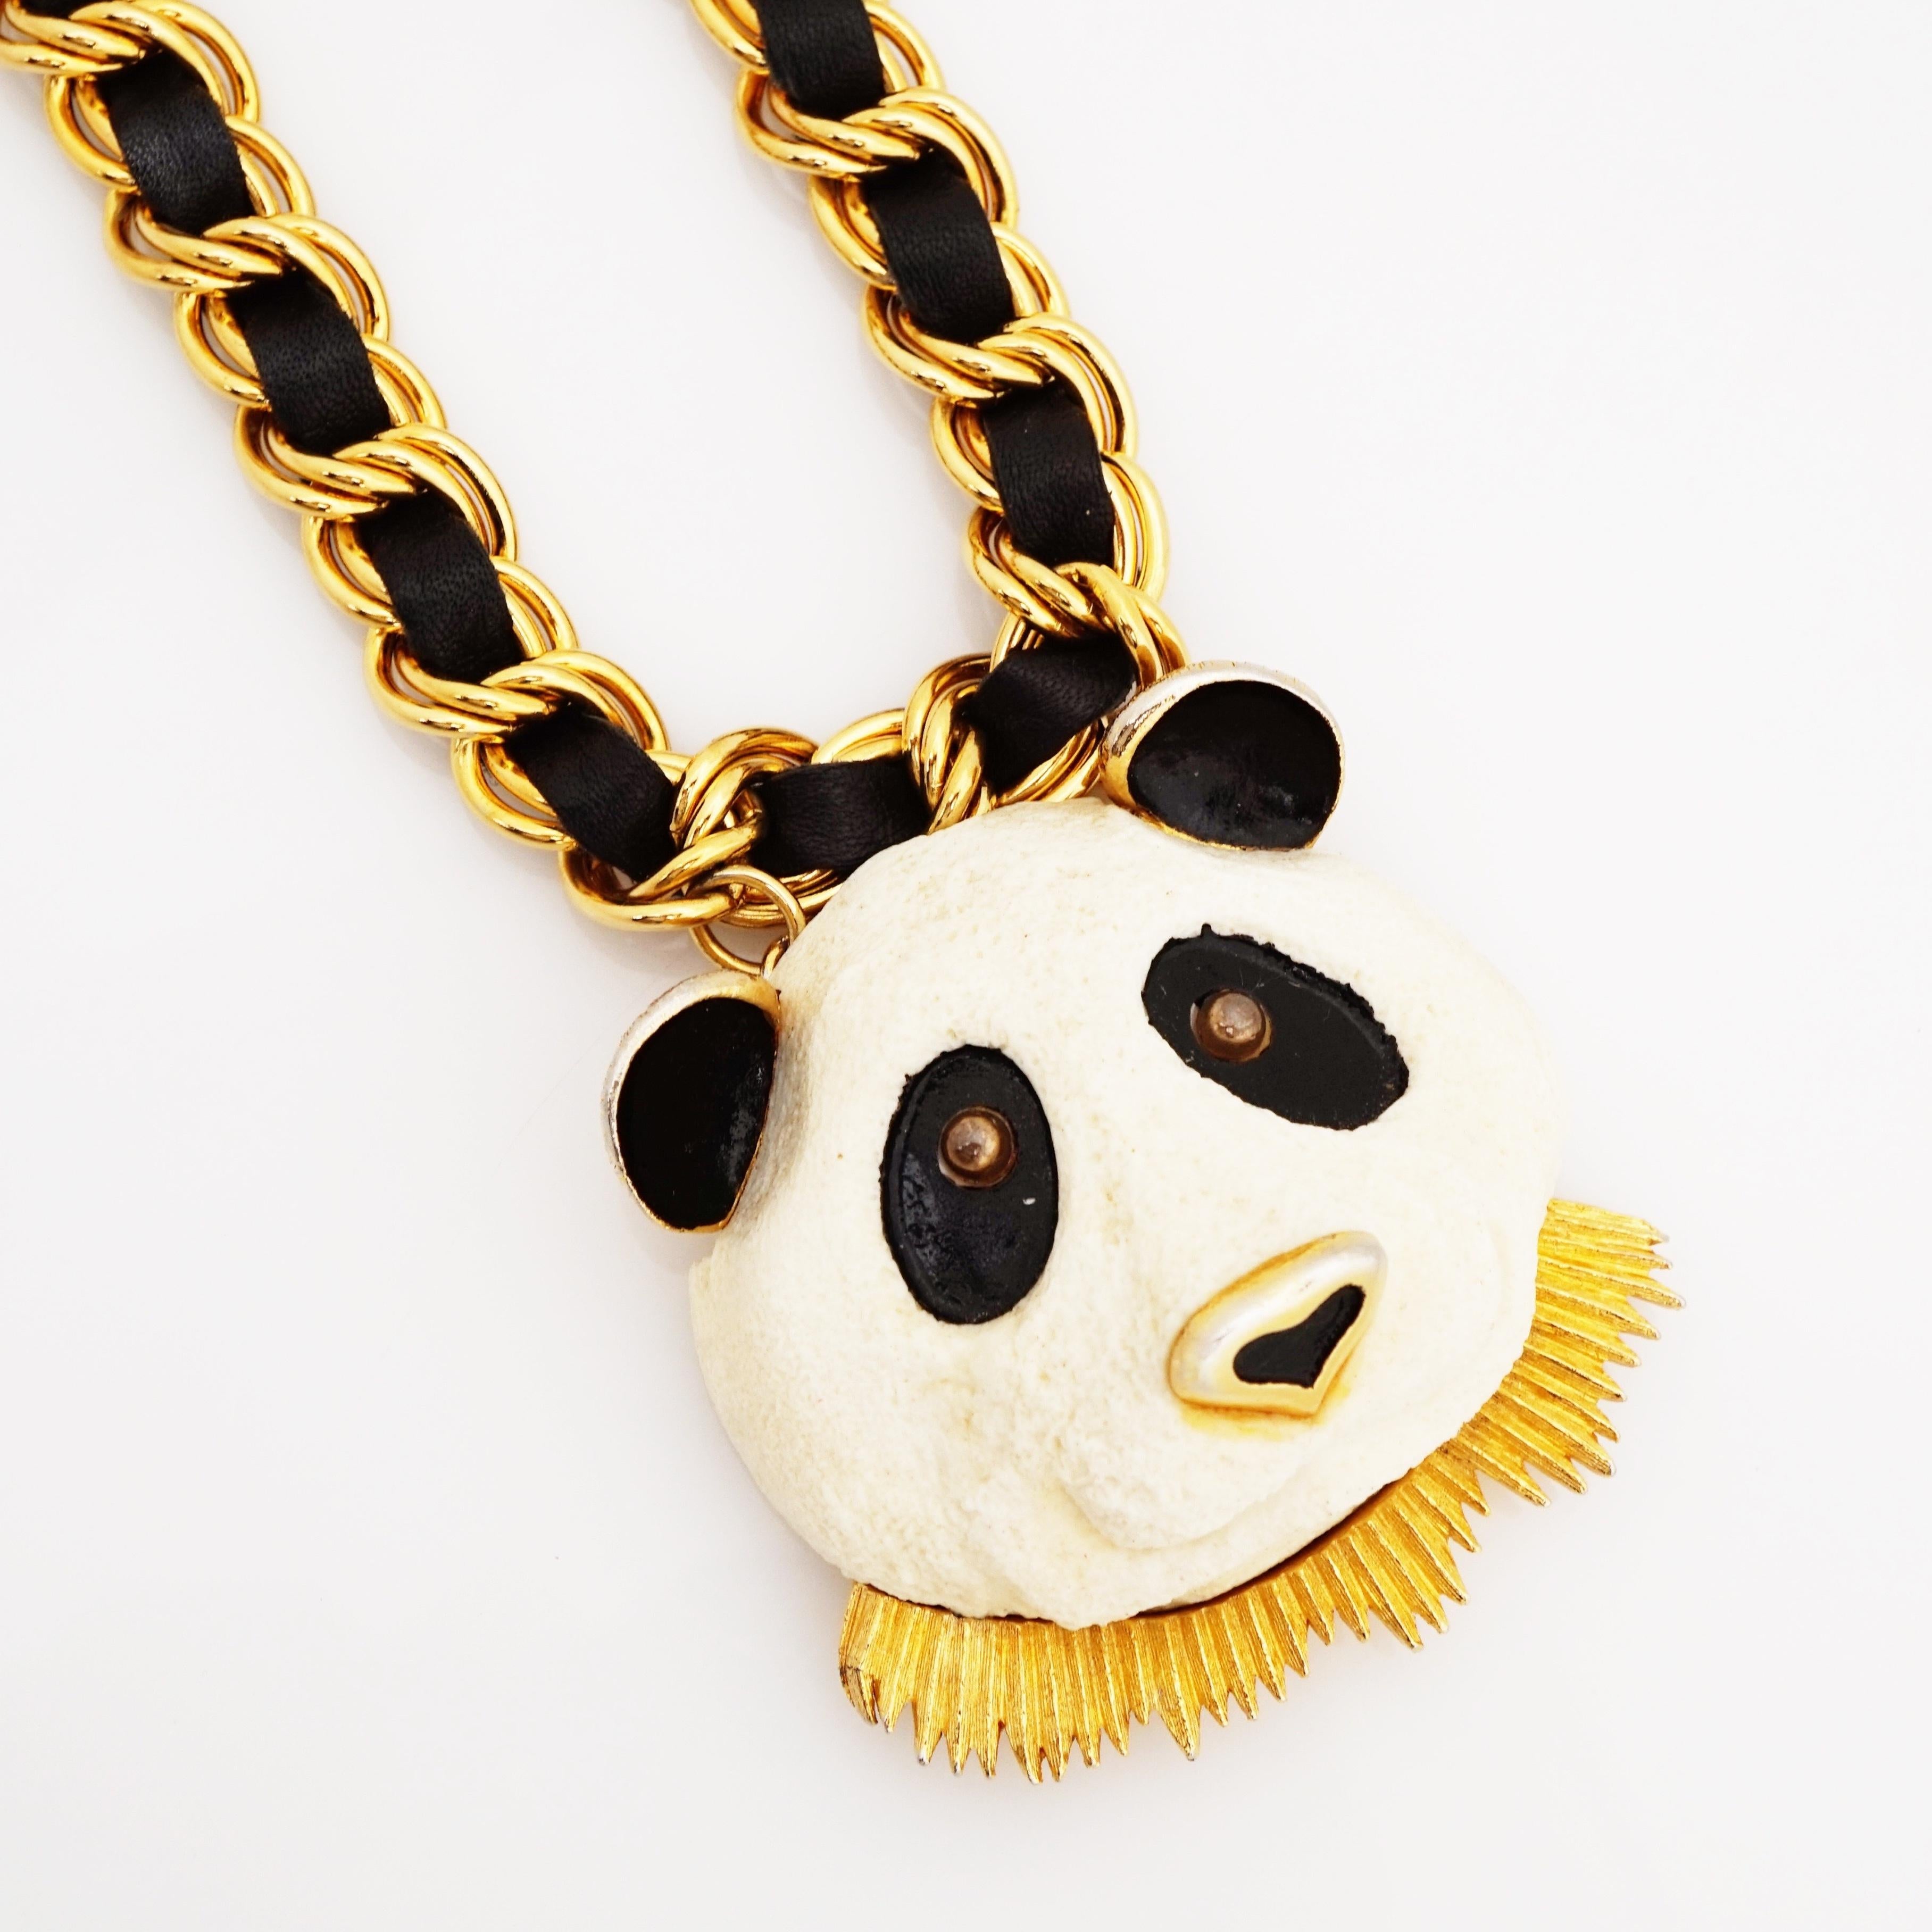 Modern 70s Panda Face Pendant Statement Necklace w Woven Black Leather Chain By RAZZA For Sale